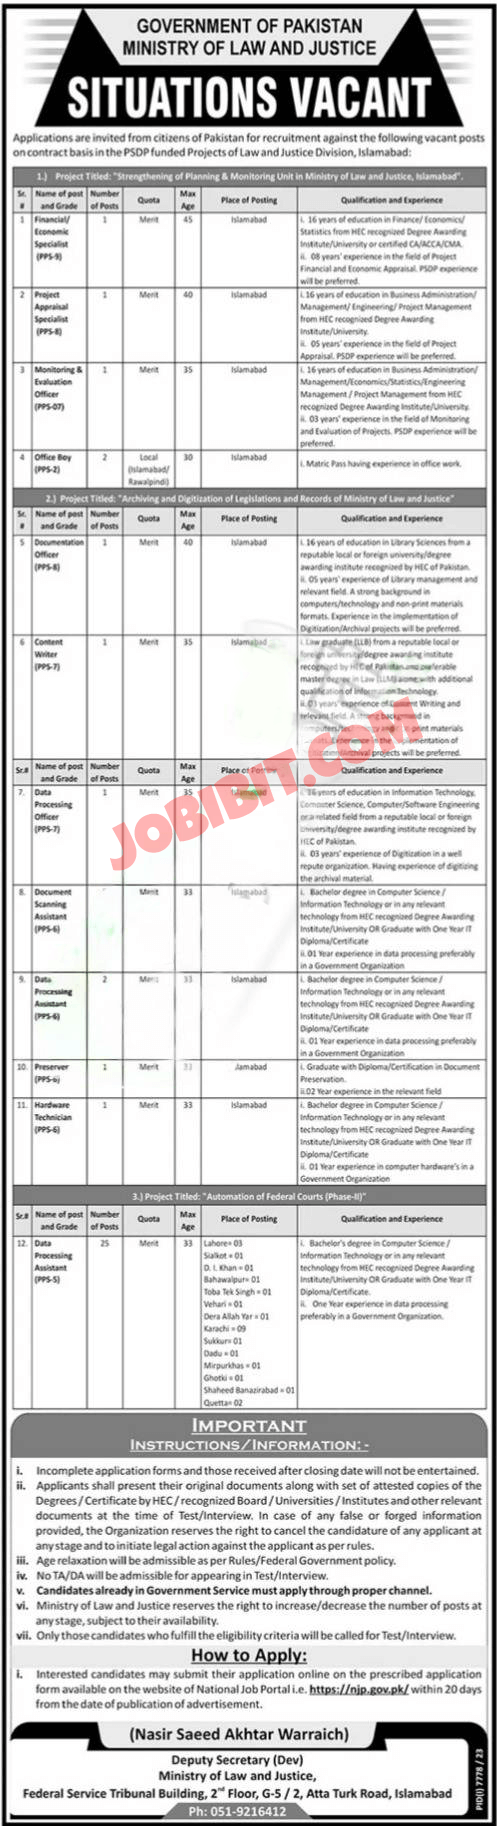  Ministry of Law and Justice Jobs In Pakistan